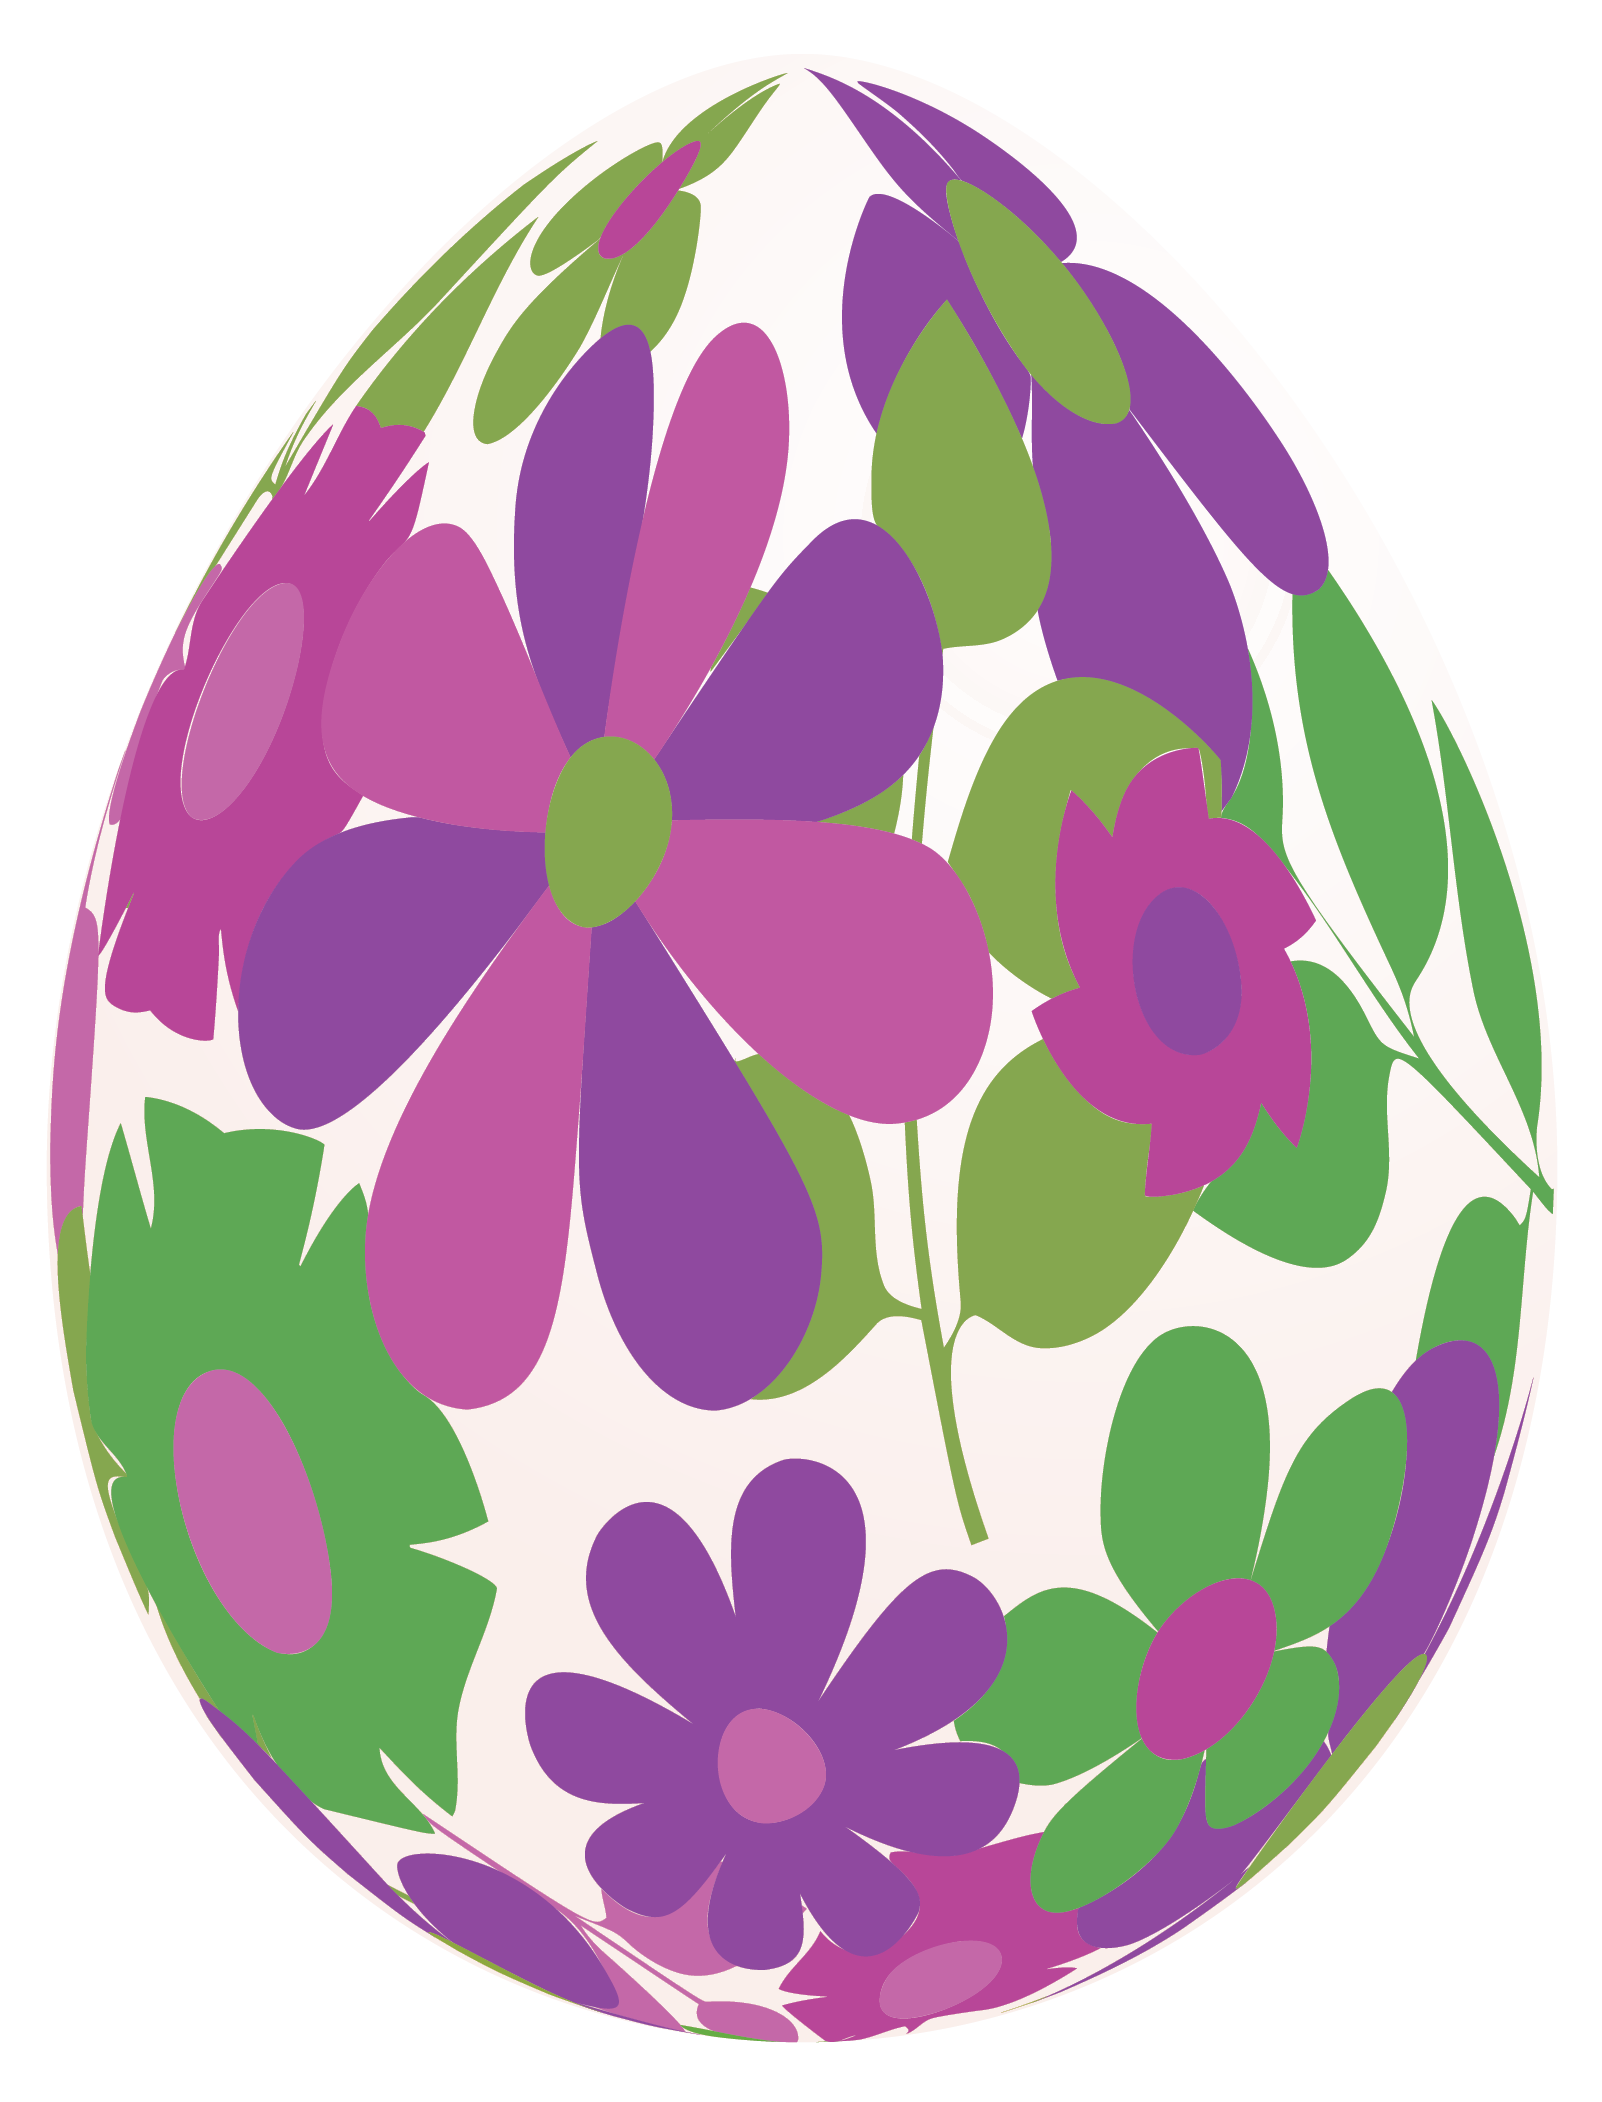 Easter white egg with. Eggs clipart transparent background